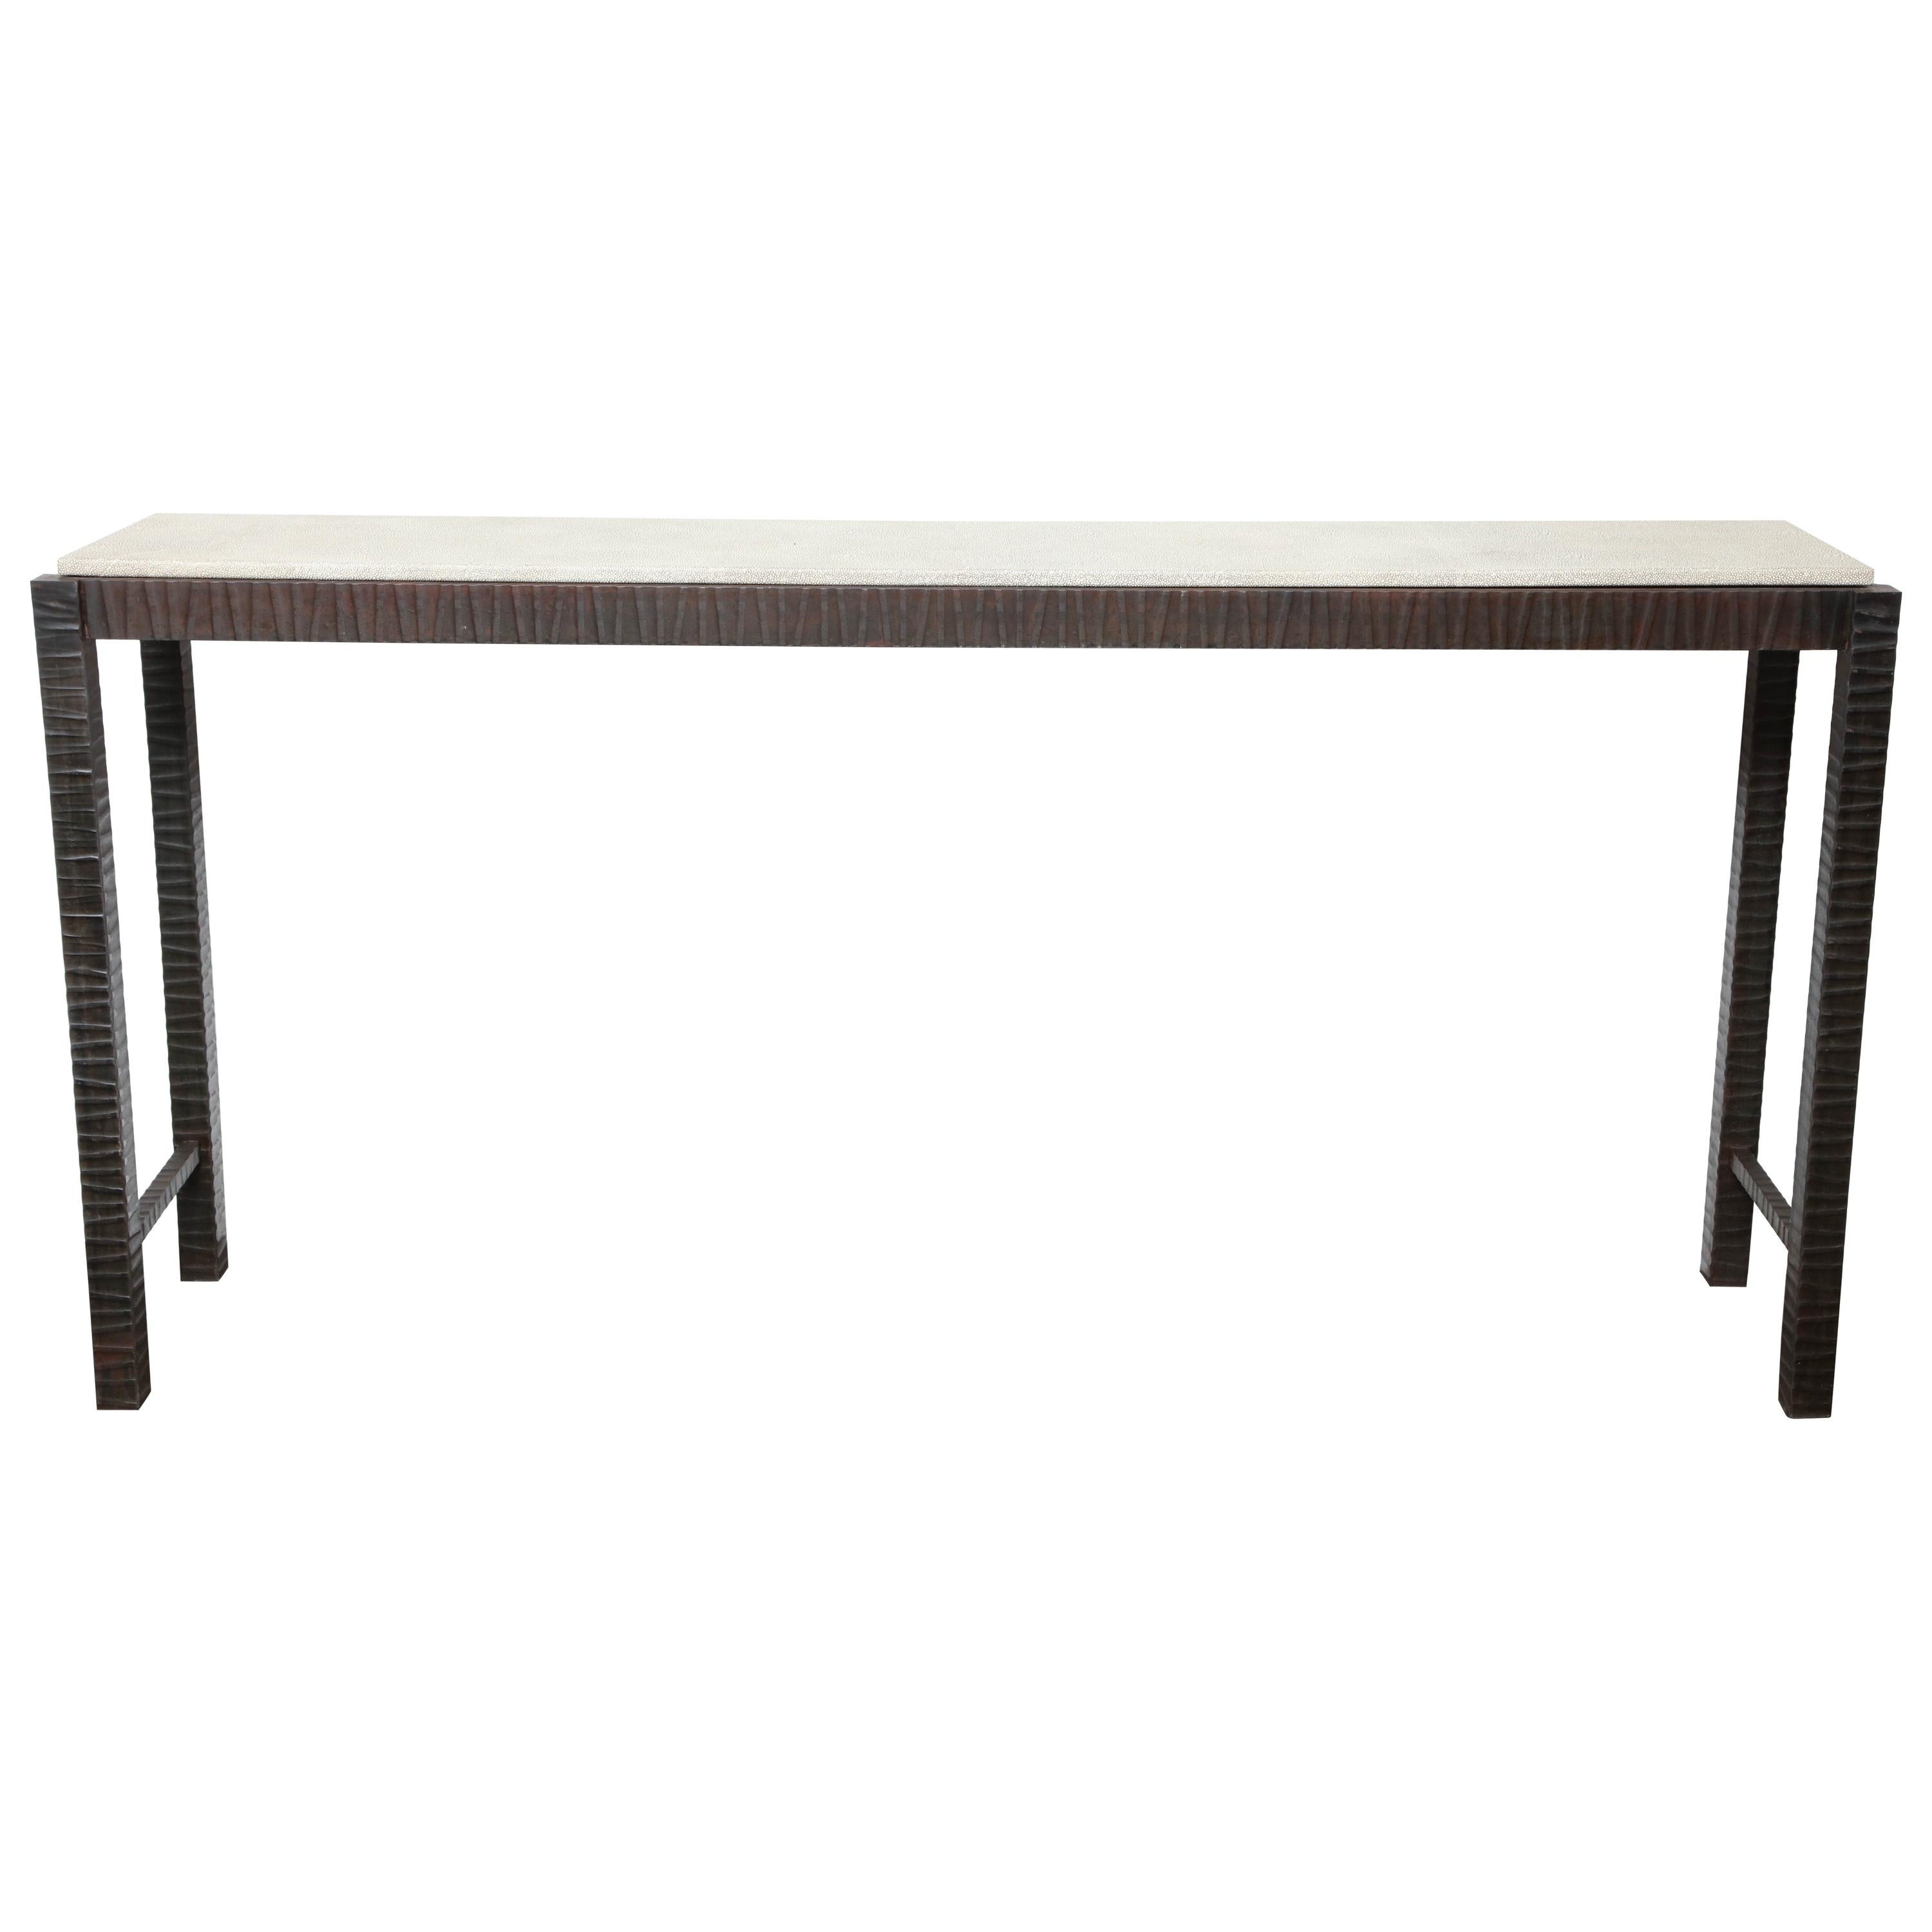 Shagreen Embossed Edelman Leather Console